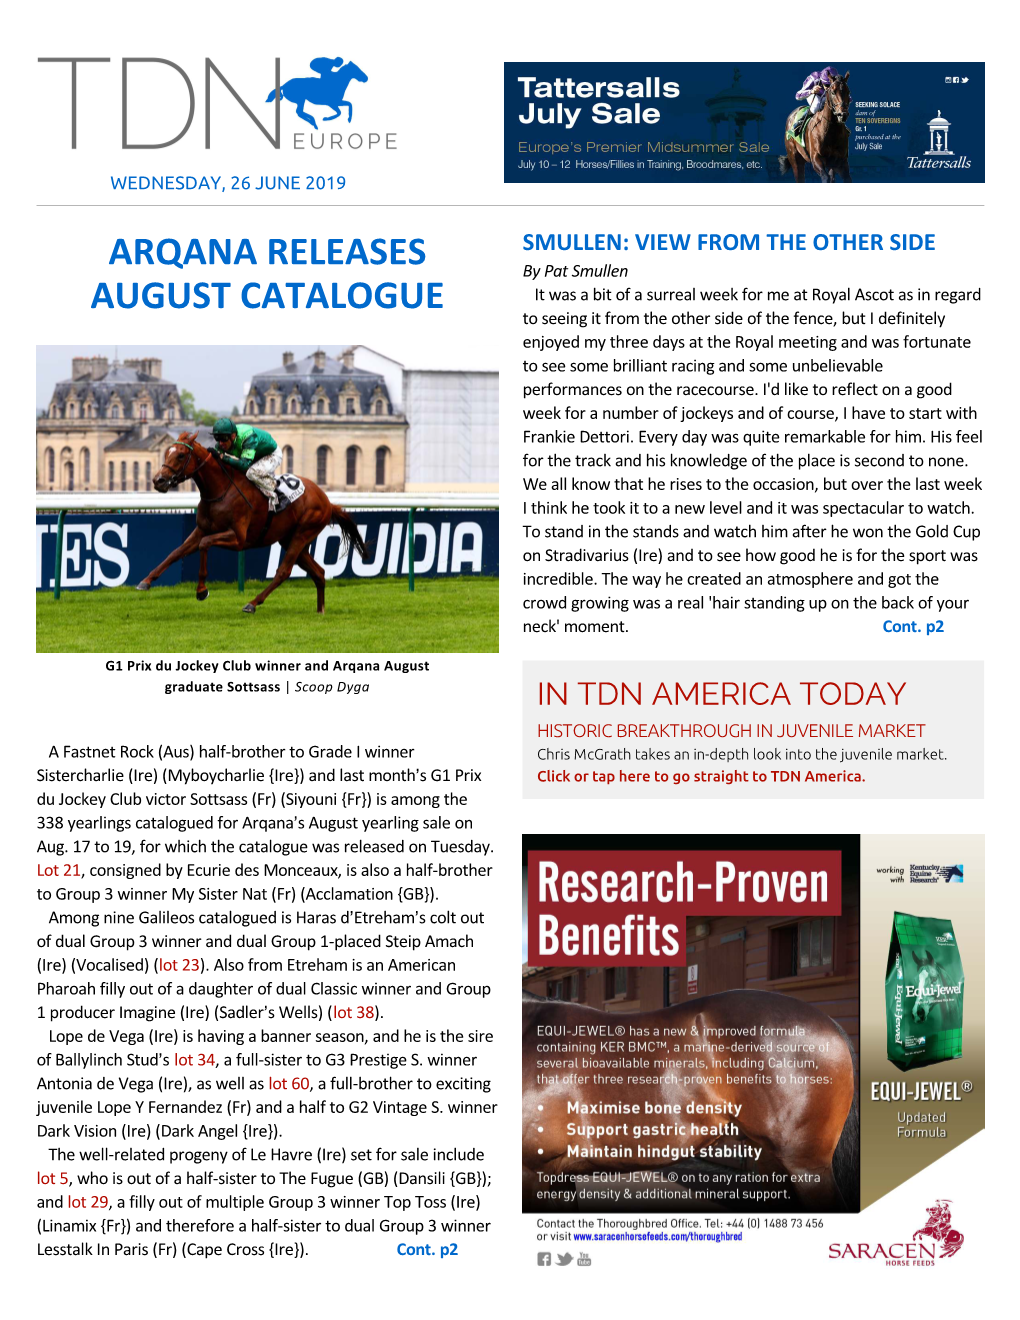 Arqana Releases August Catalogue Cont